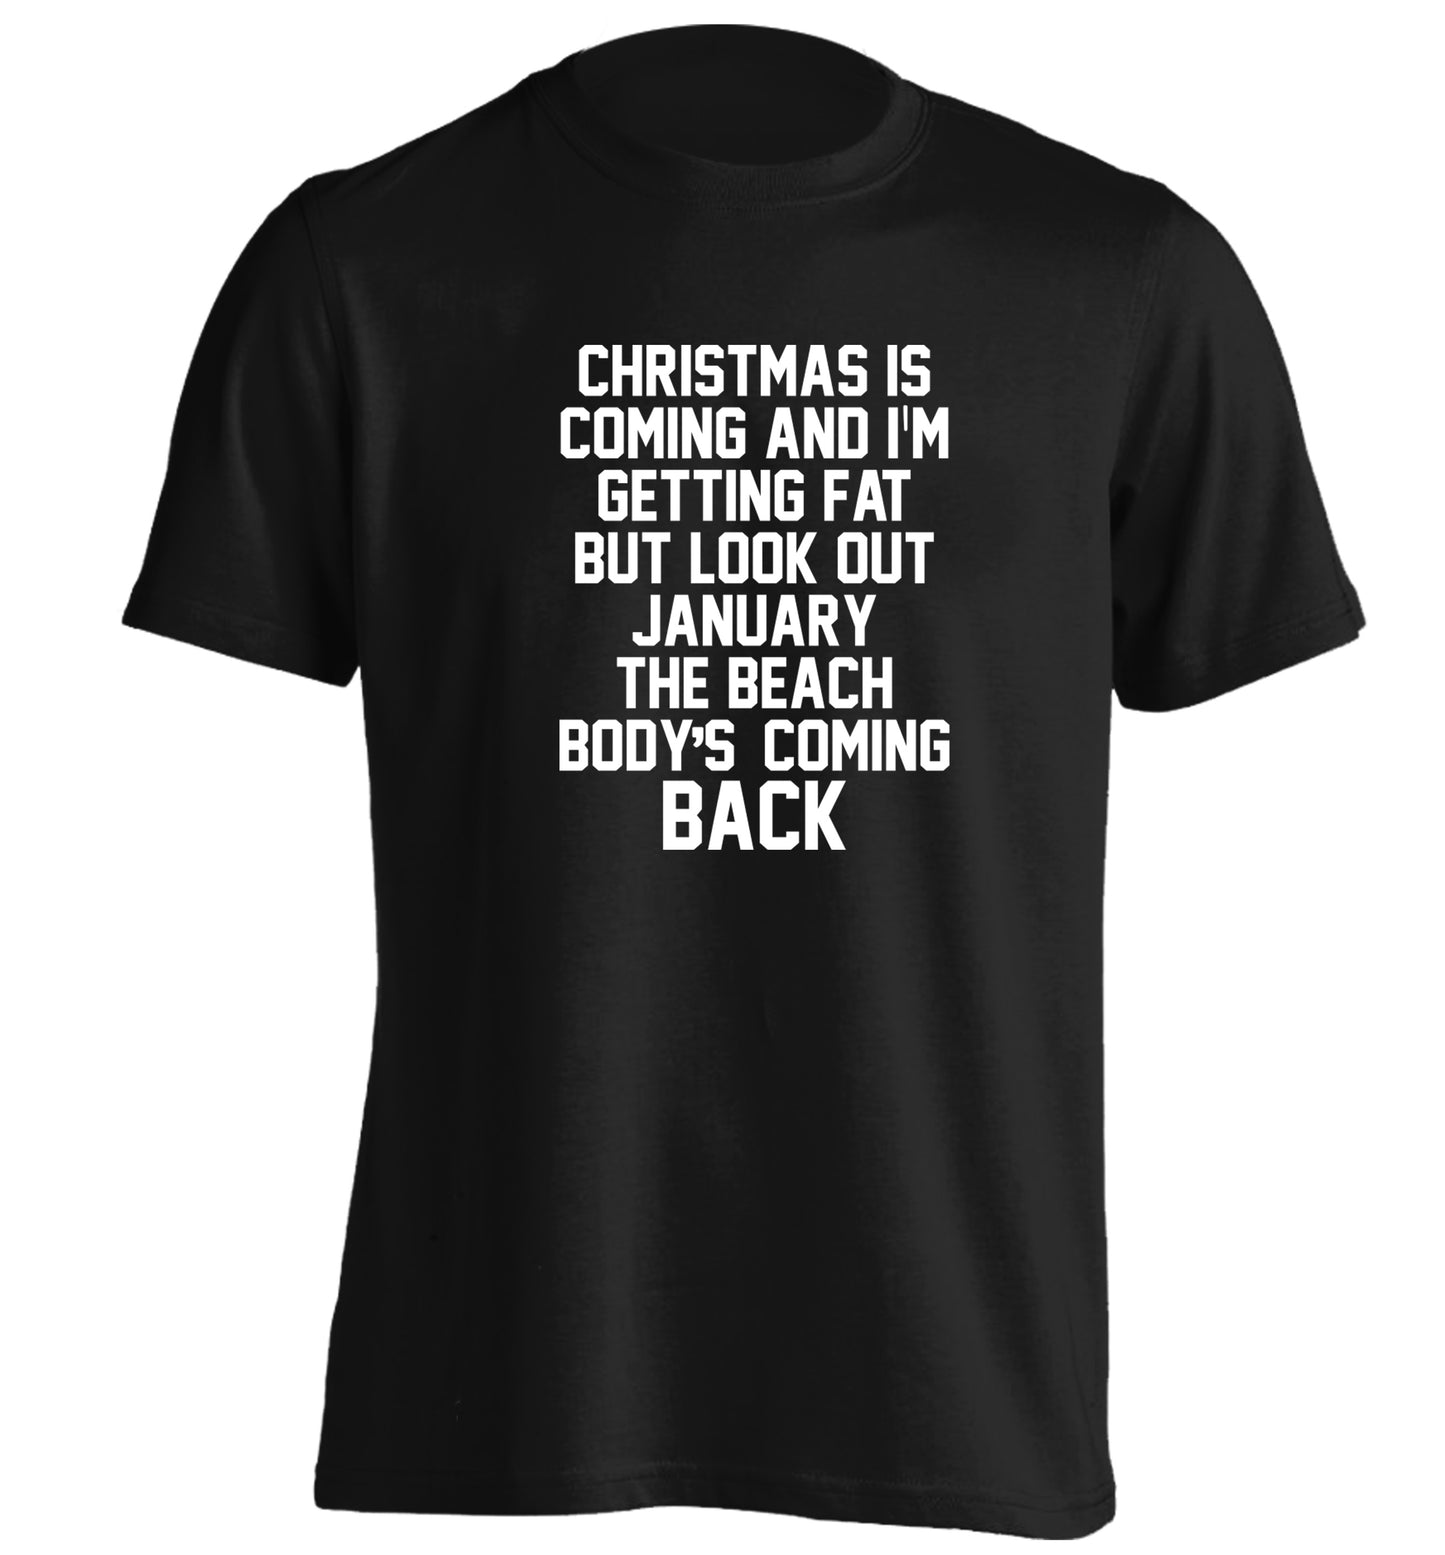 Christmas is coming and I'm getting fat but look out January the beach body's coming back! adults unisex black Tshirt 2XL